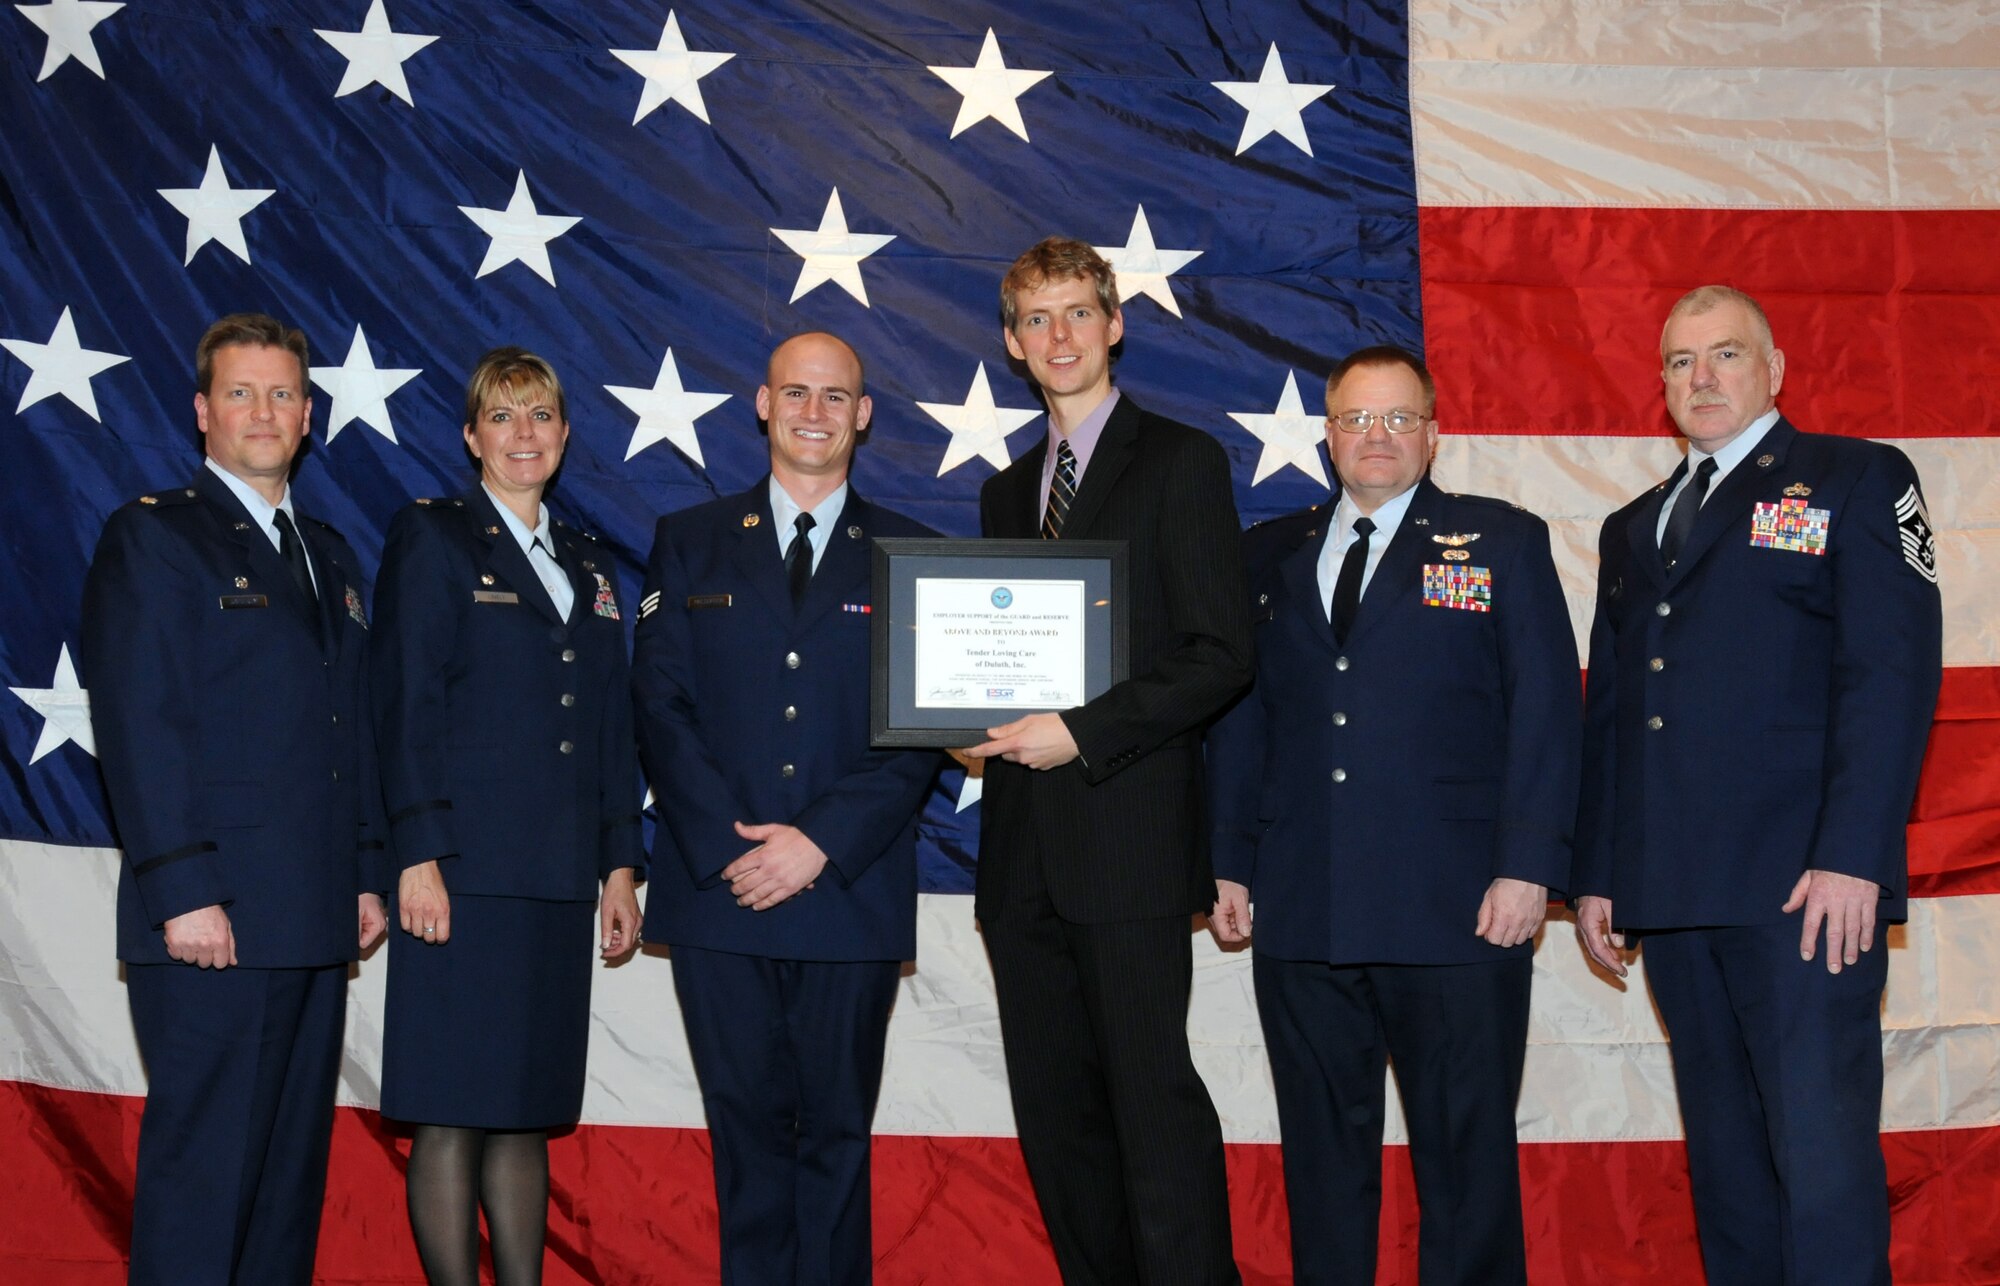 Kevin Johnson of Tender Loving Care Inc. poses for a group photo with members of the 148th Fighter Wing, Duluth, Minn. while attending a Minnesota Employer Support for the Guard and Reserve Banquet held in Oakdale, Minn.  Johnson was at the banquet to accept the "Above and Beyond Award" recognizing Tender Loving Care Inc. for its support of military employees.  (U.S. Air Force photo by Master Sgt. Ralph J. Kapustka)